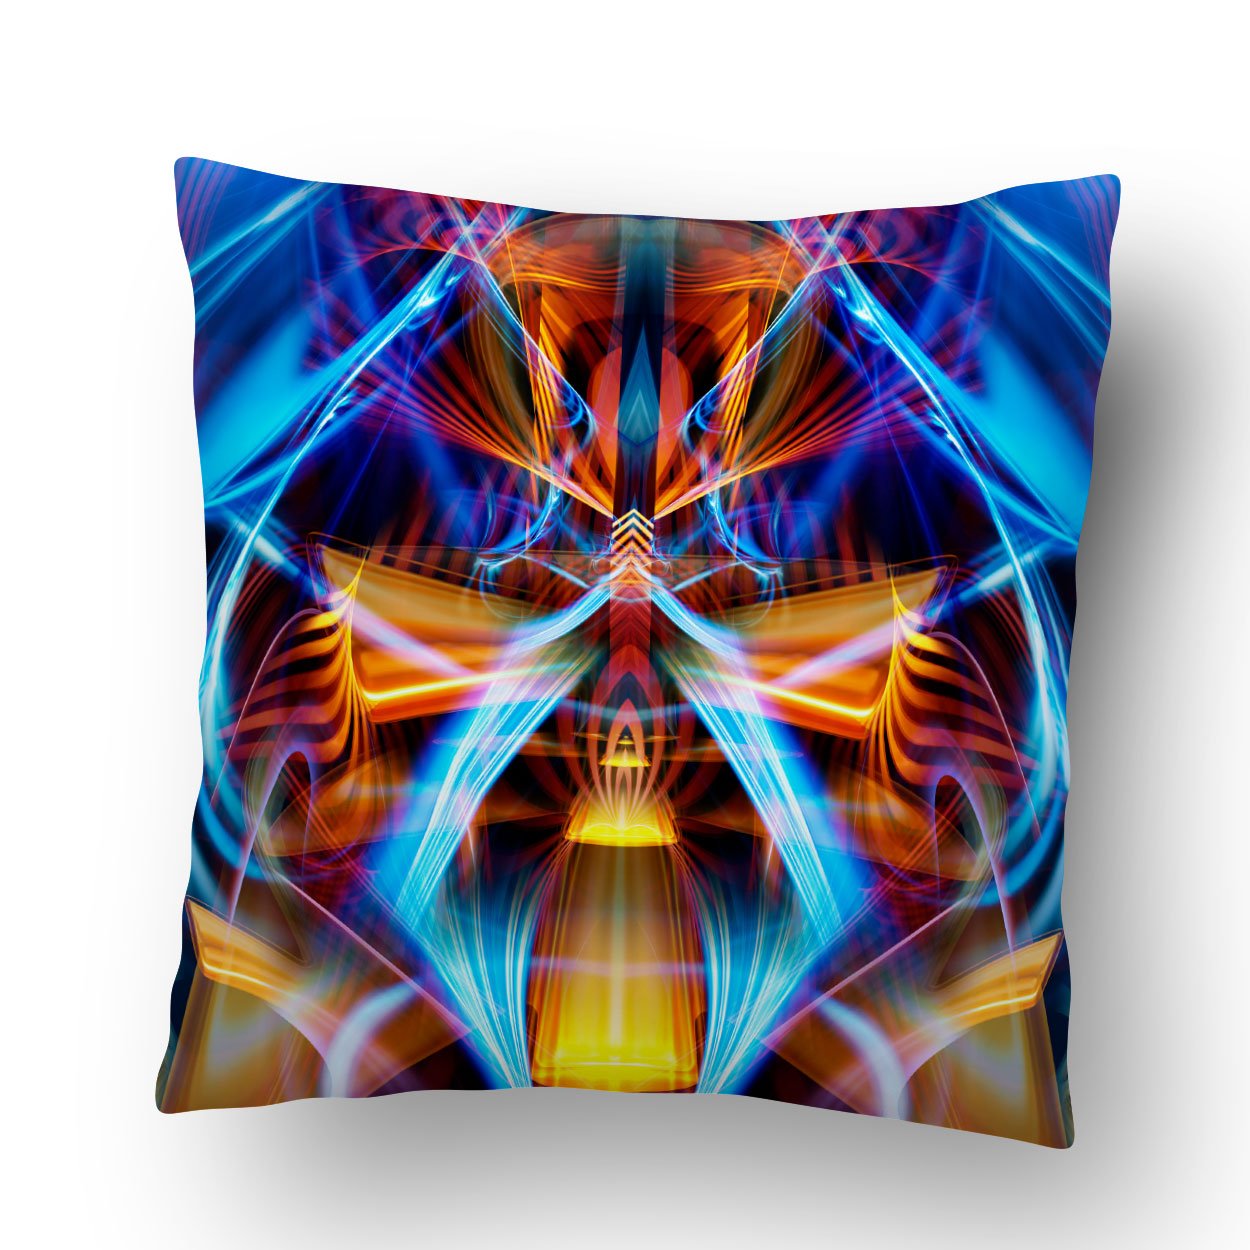 Galactic Sphinx Throw Pillow Cover